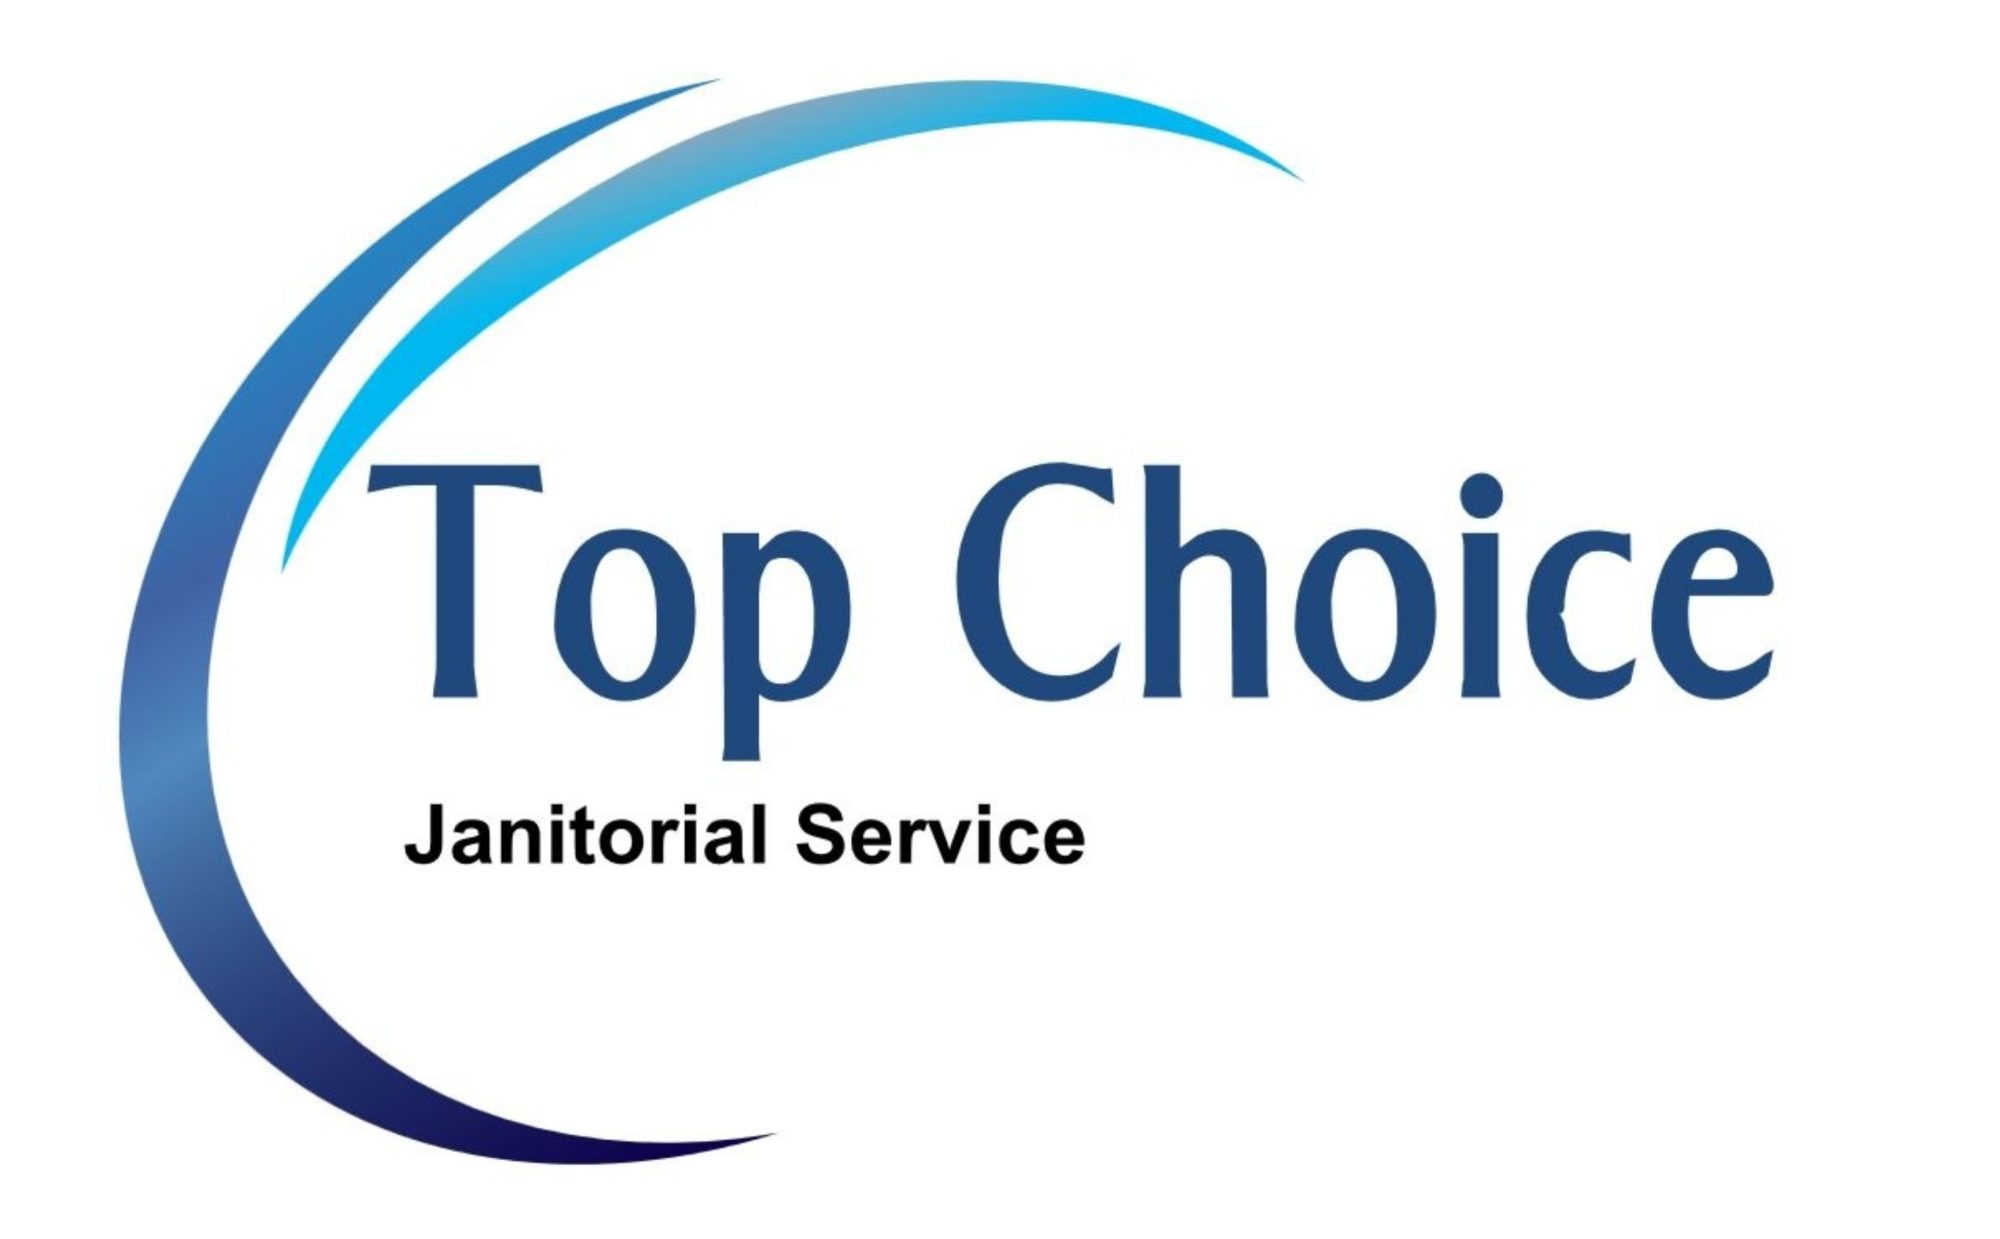 Top Choice Janitorial Service Logo